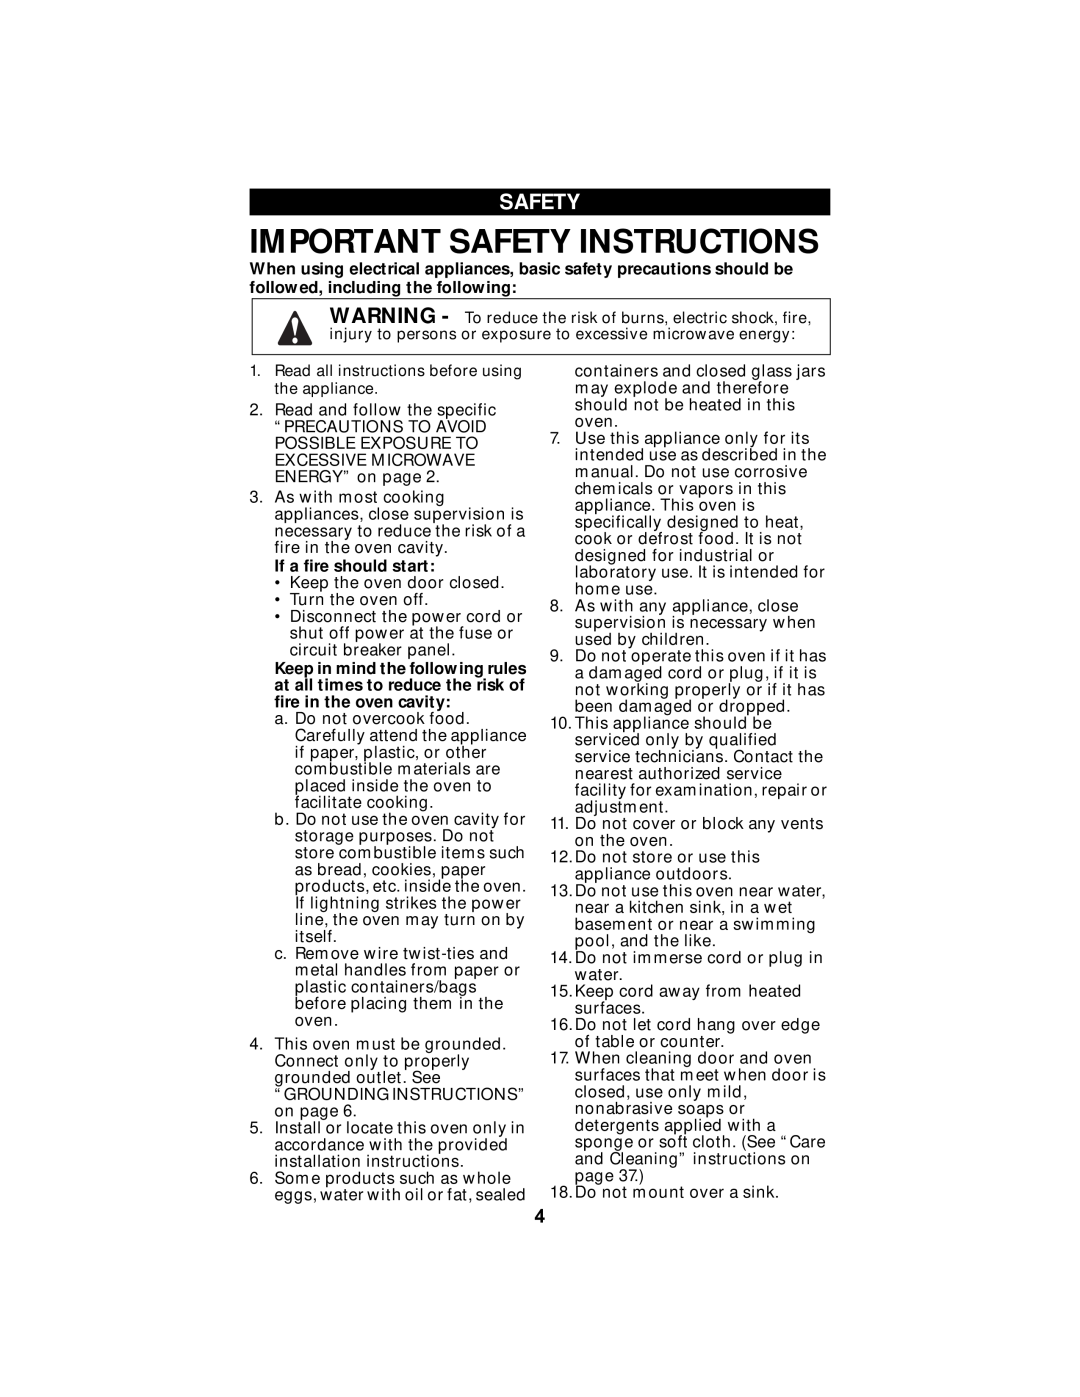 Maytag MMV5100AA manual If a fire should start, Important Safety Instructions 